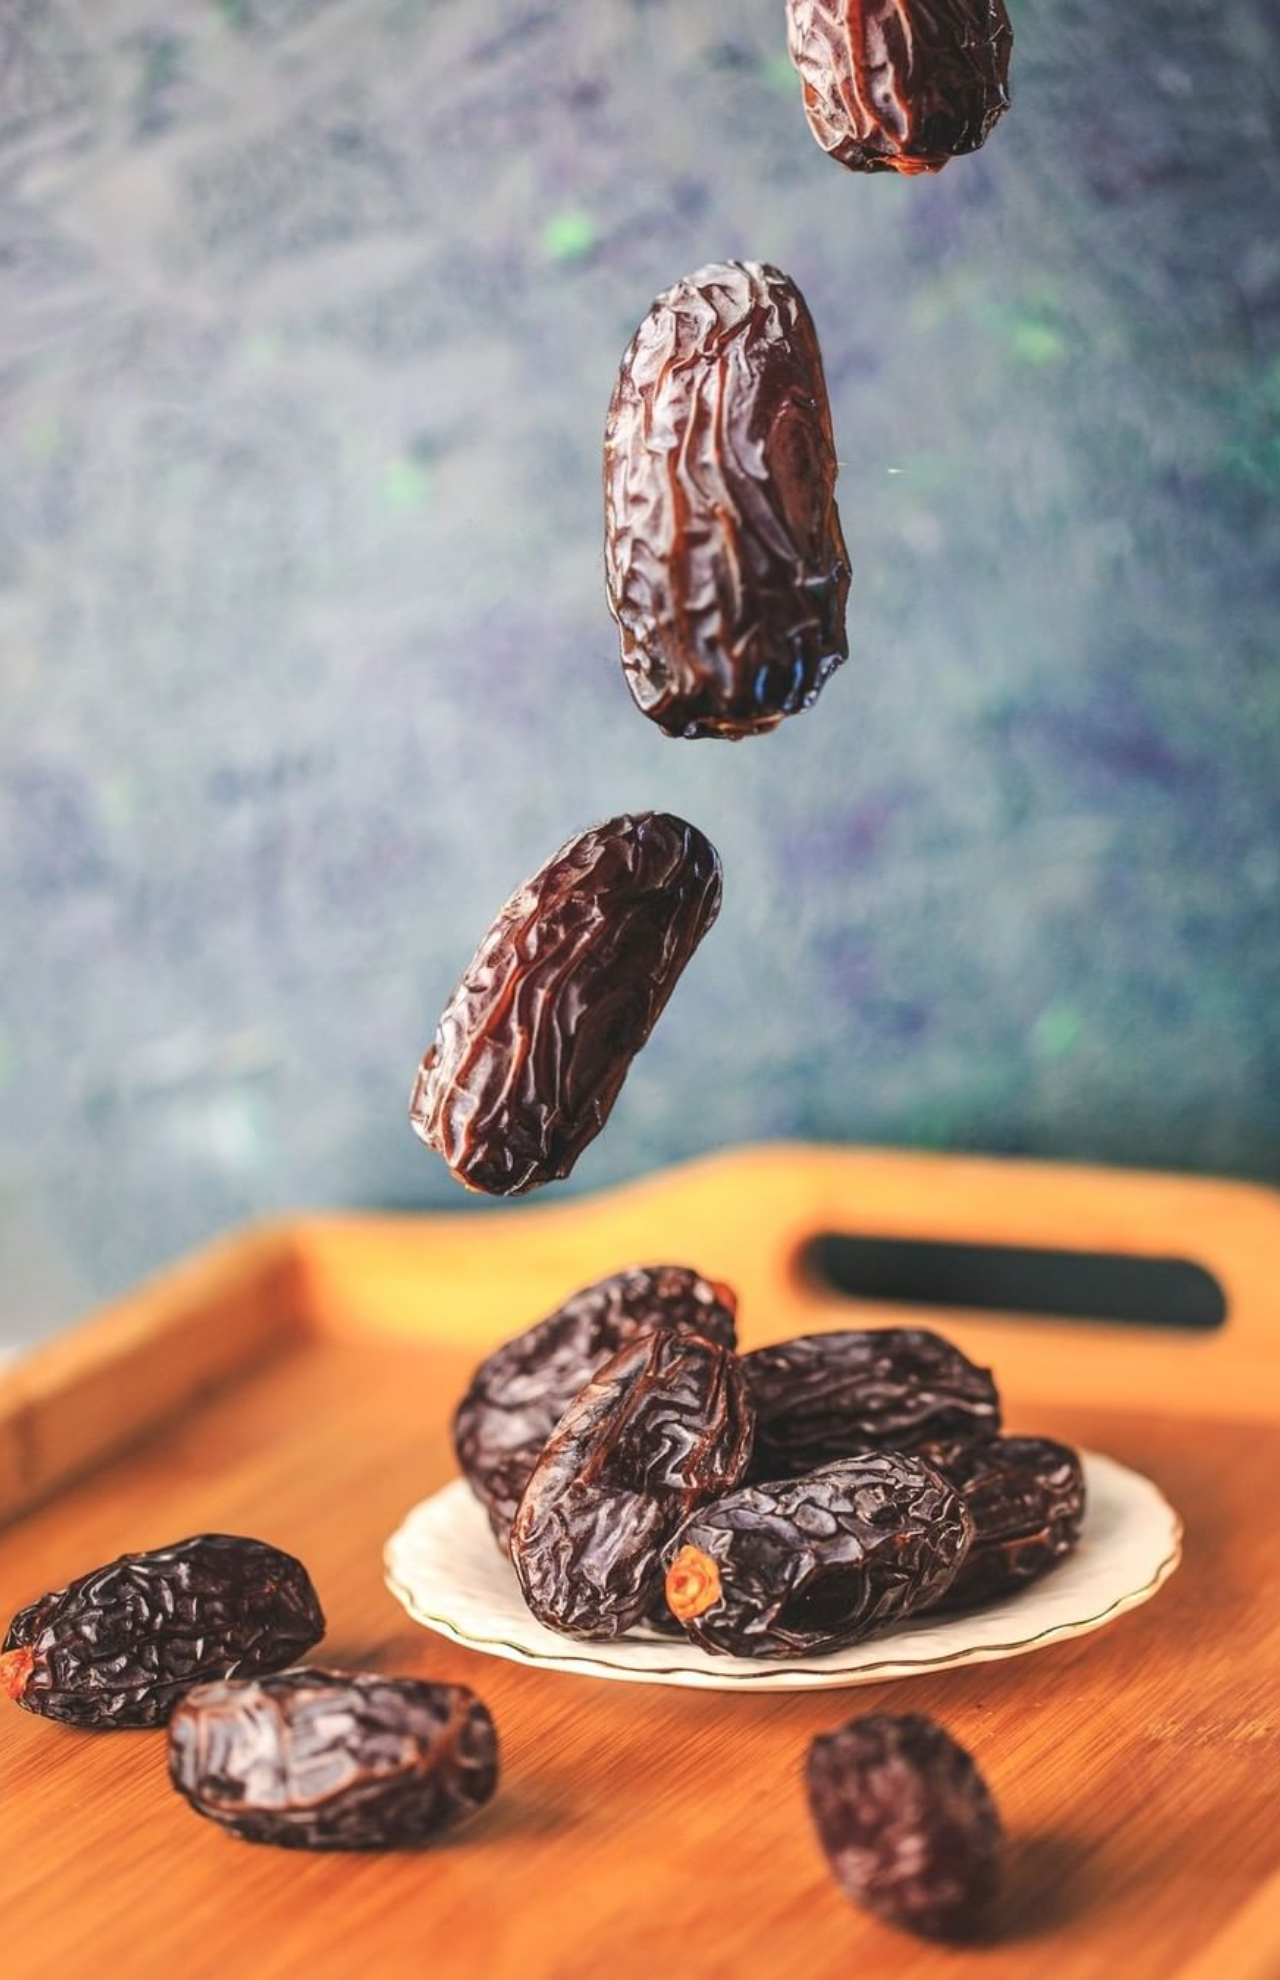 7 Healthy benefits of dates that you should know